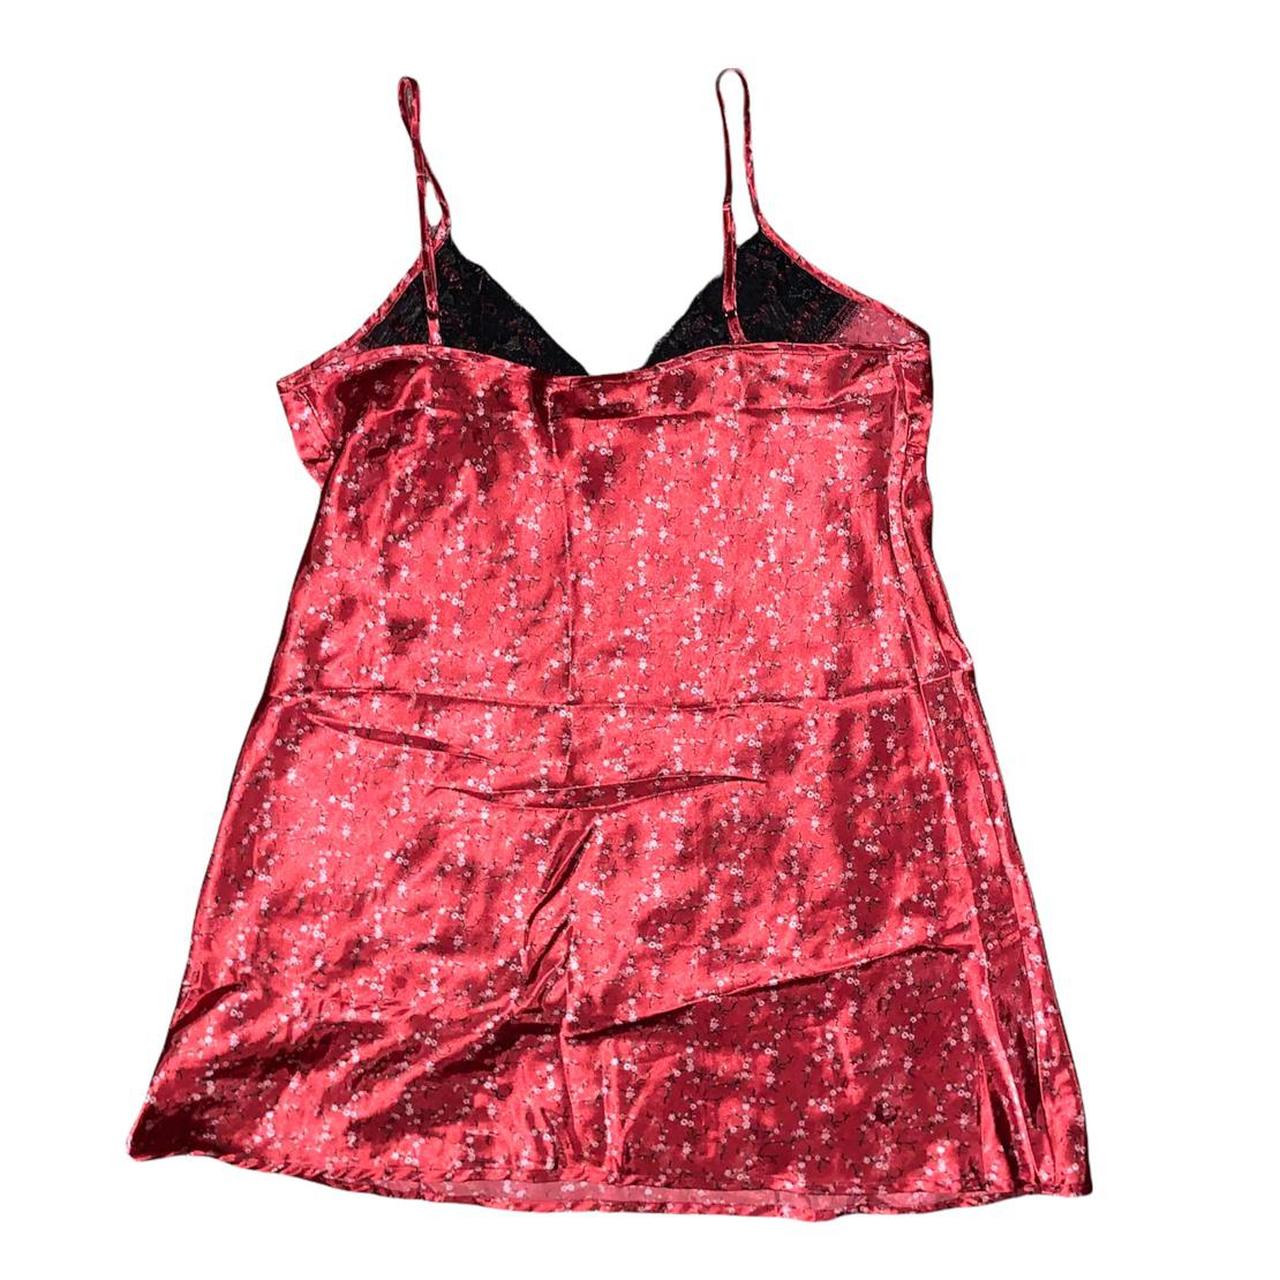 Product Image 4 - Intimate Secrets Red Lace Floral